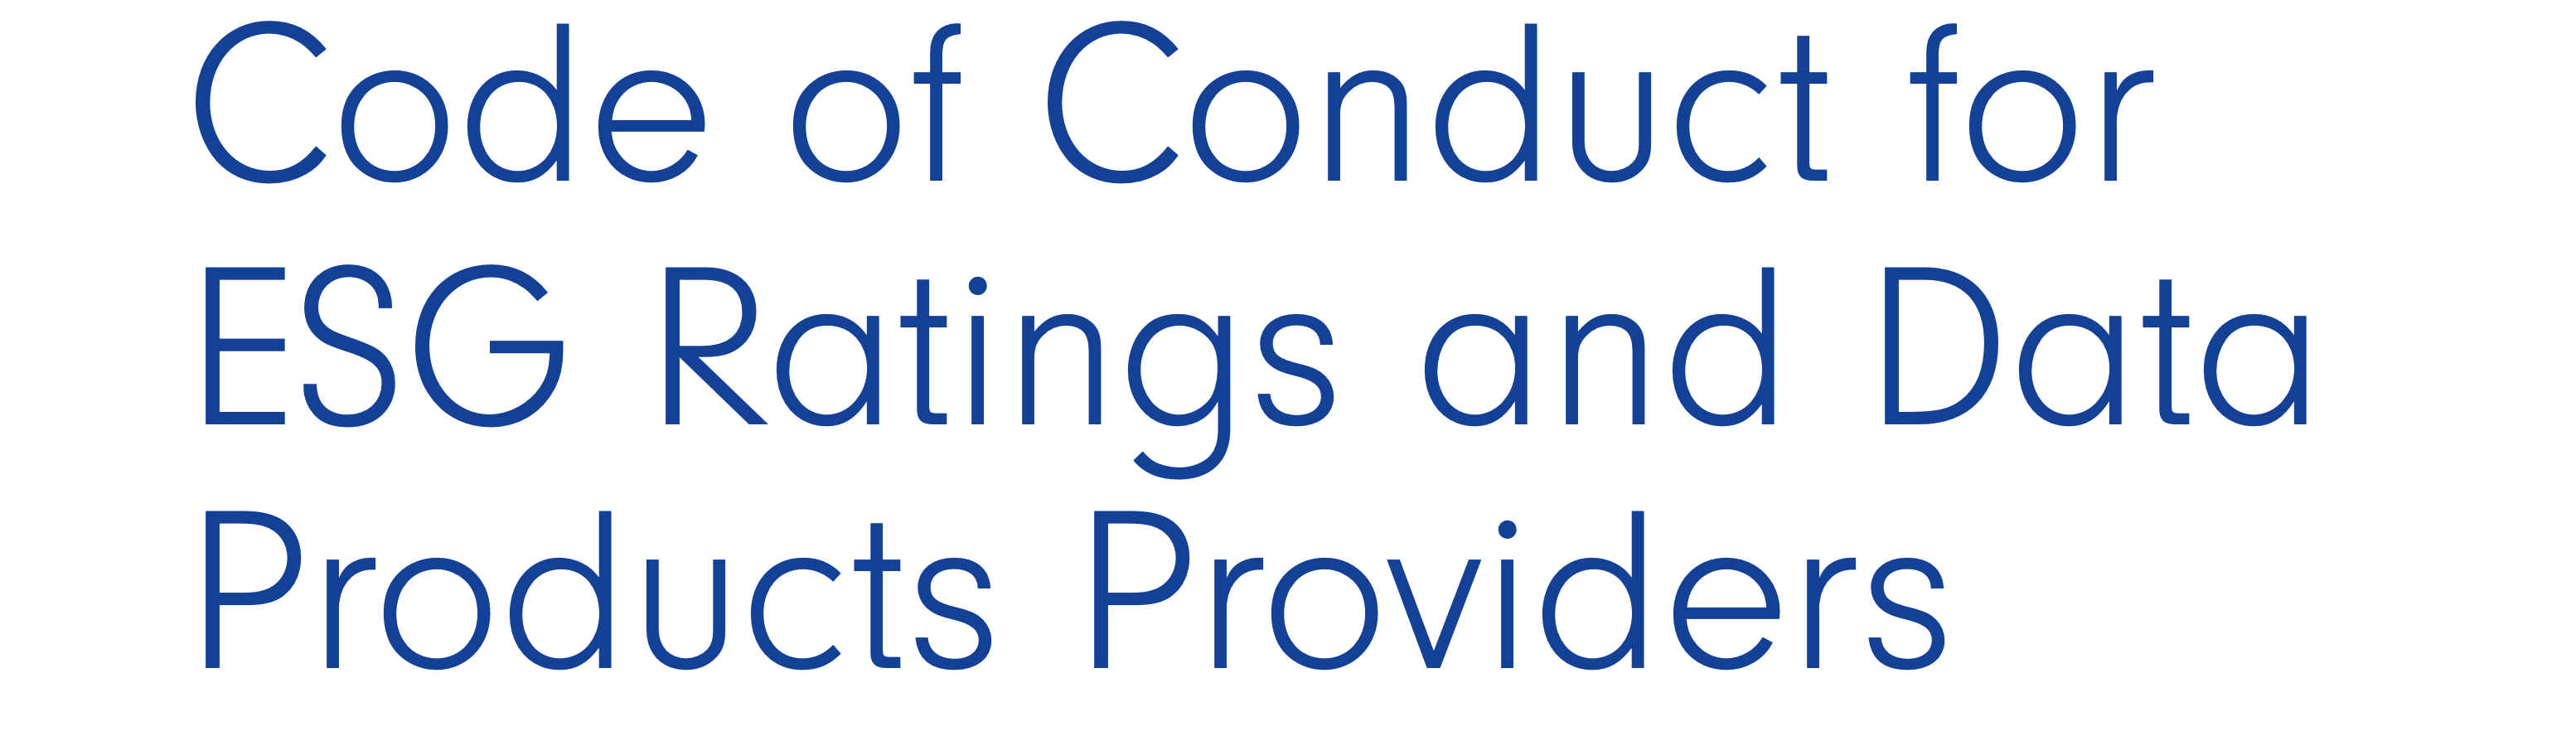 Code of Conduct for ESG raters - ICMA - sustainAX